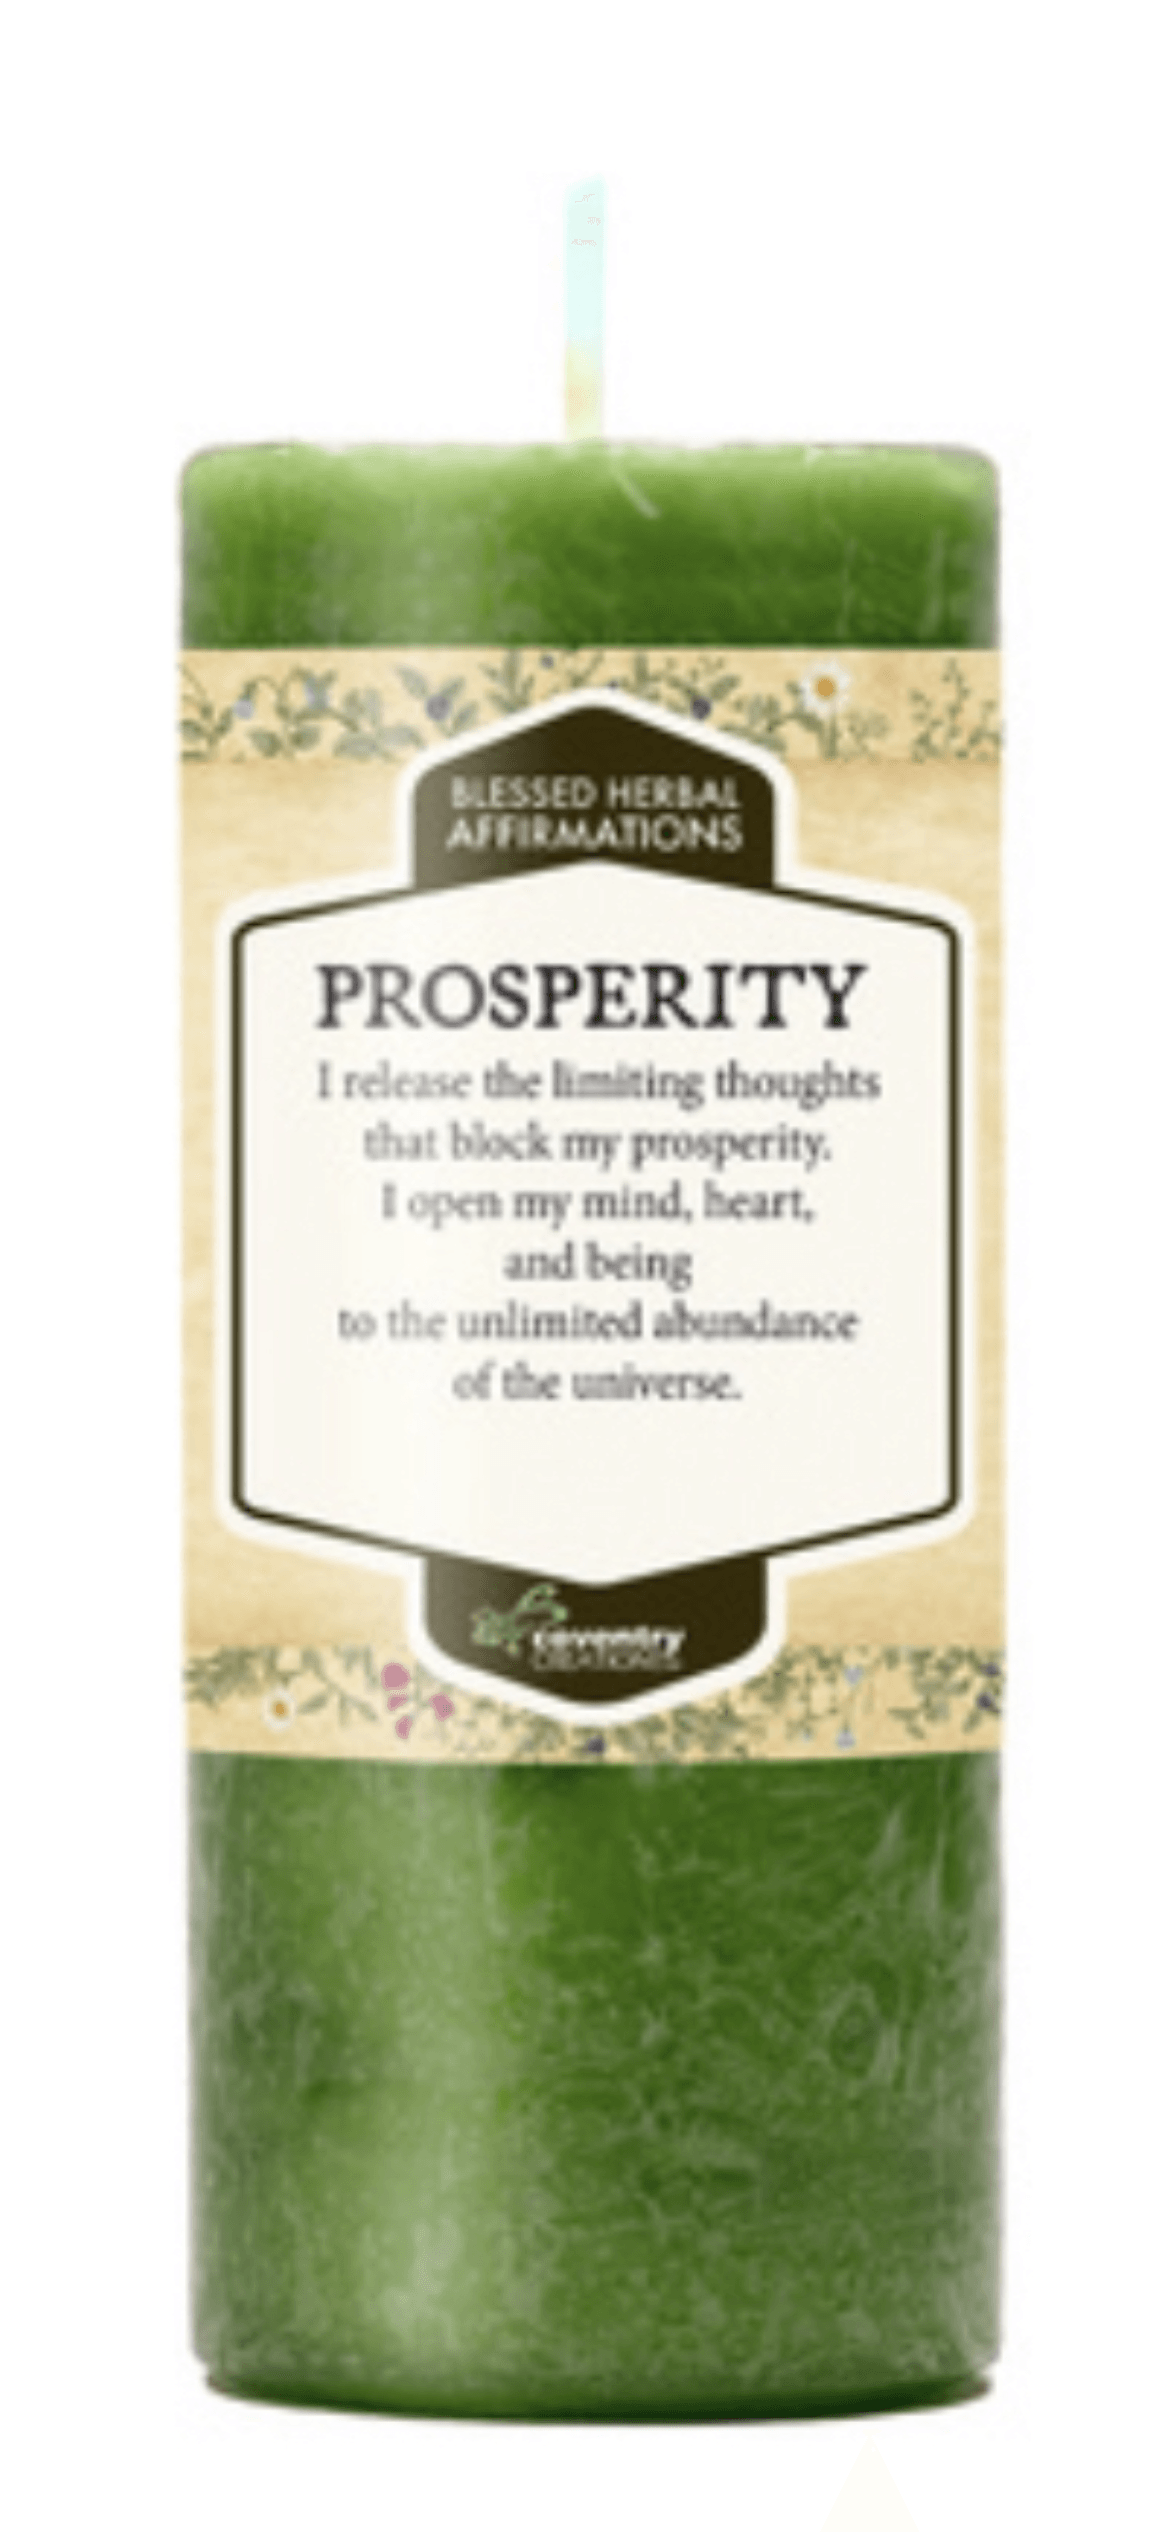 Affirmation Candle PROSPERITY Blessed Herbal Spell Candle - Muse Crystals & Mystical Gifts